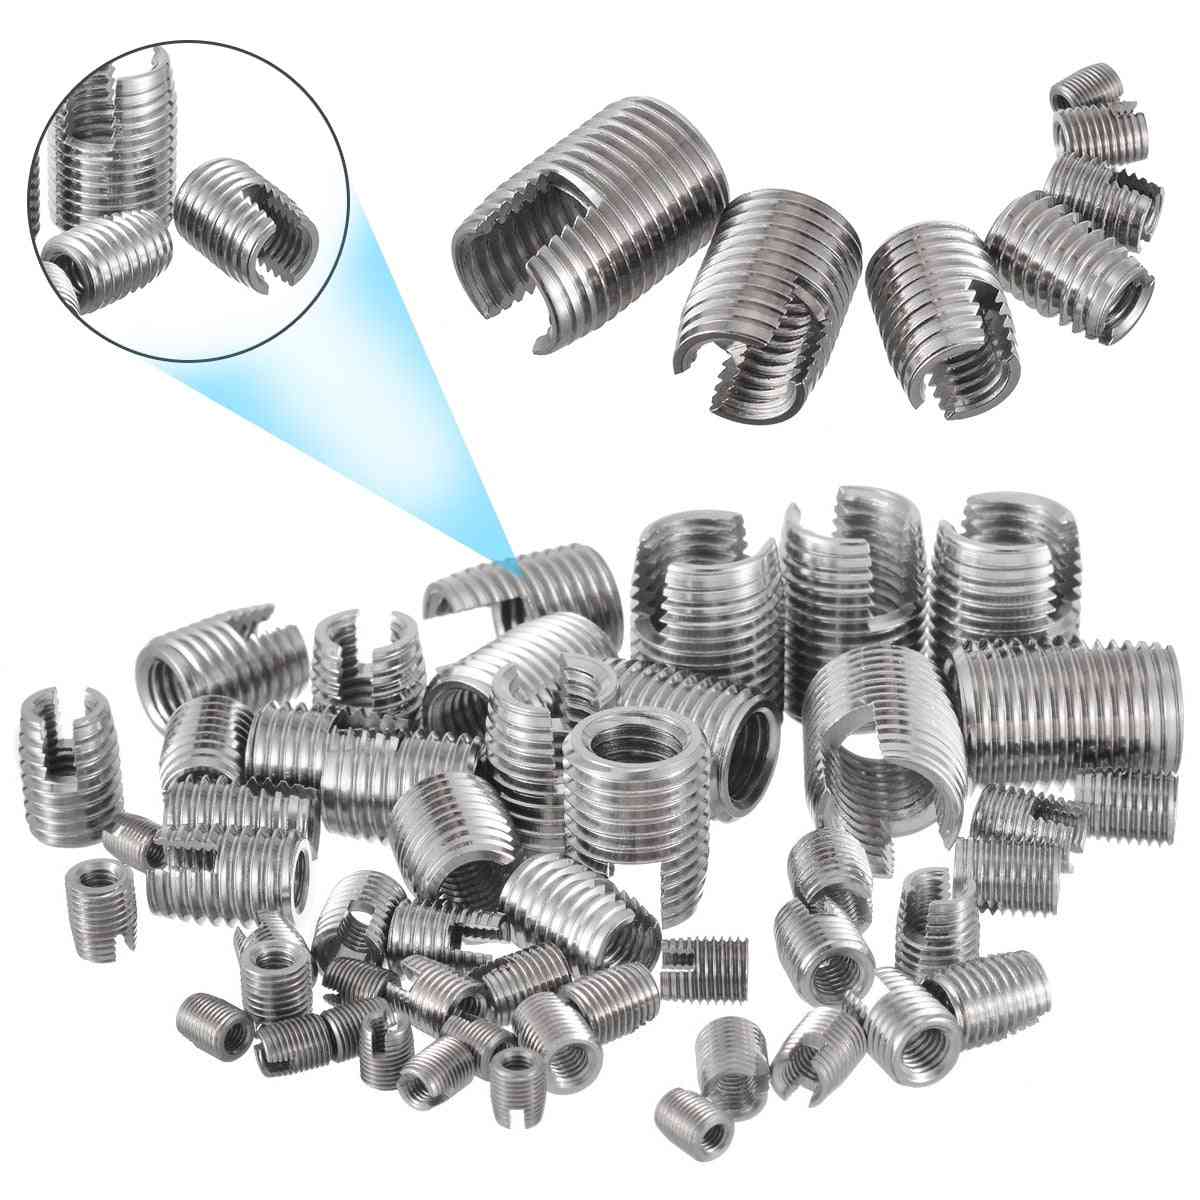 Stainless Steel Thread Repair Insert Kit -helical Self Tapping Slotted Screw